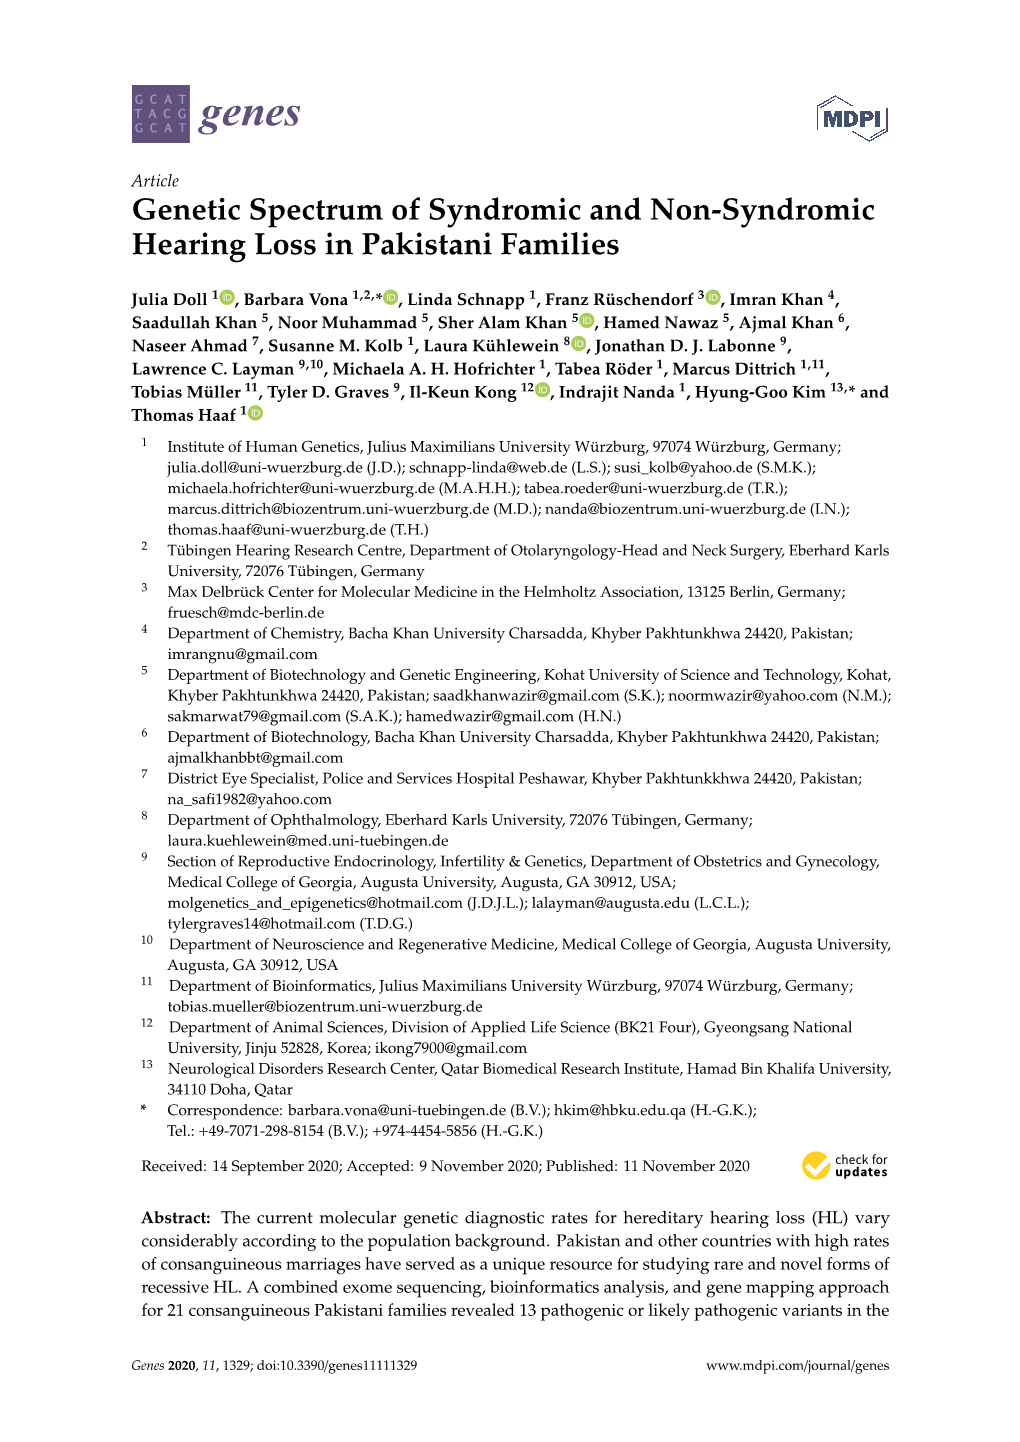 Genetic Spectrum of Syndromic and Non-Syndromic Hearing Loss in Pakistani Families